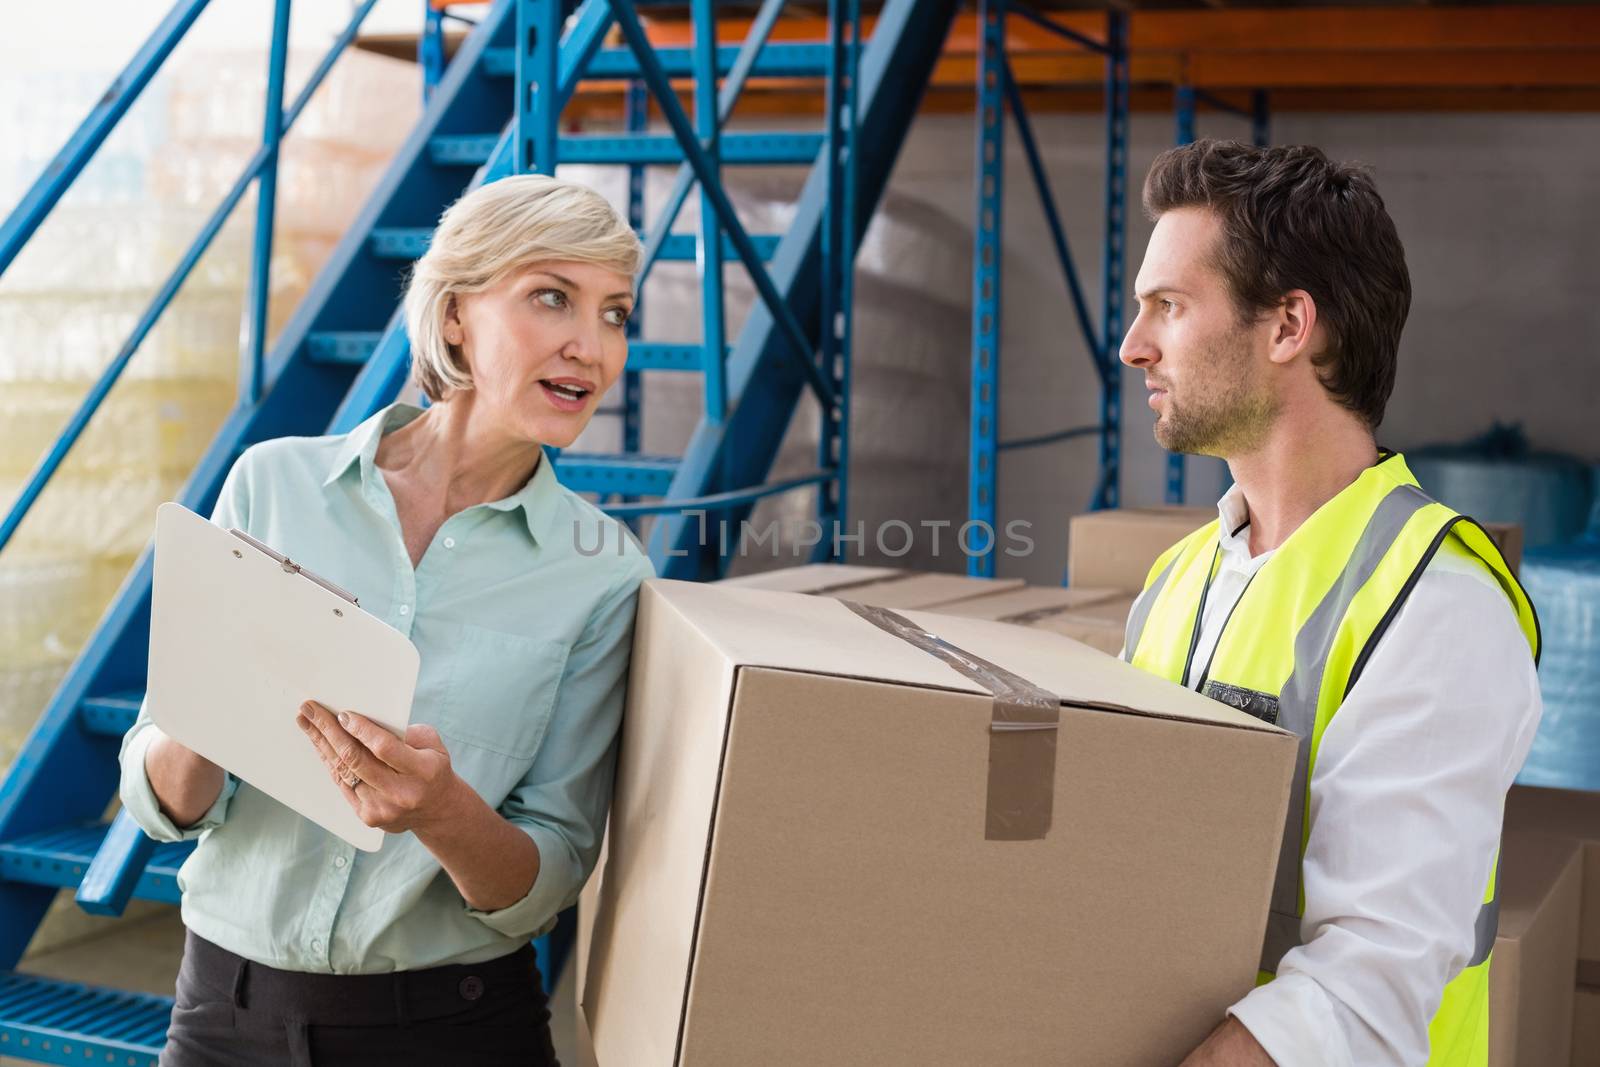 Warehouse manager and worker talking together in a large warehouse